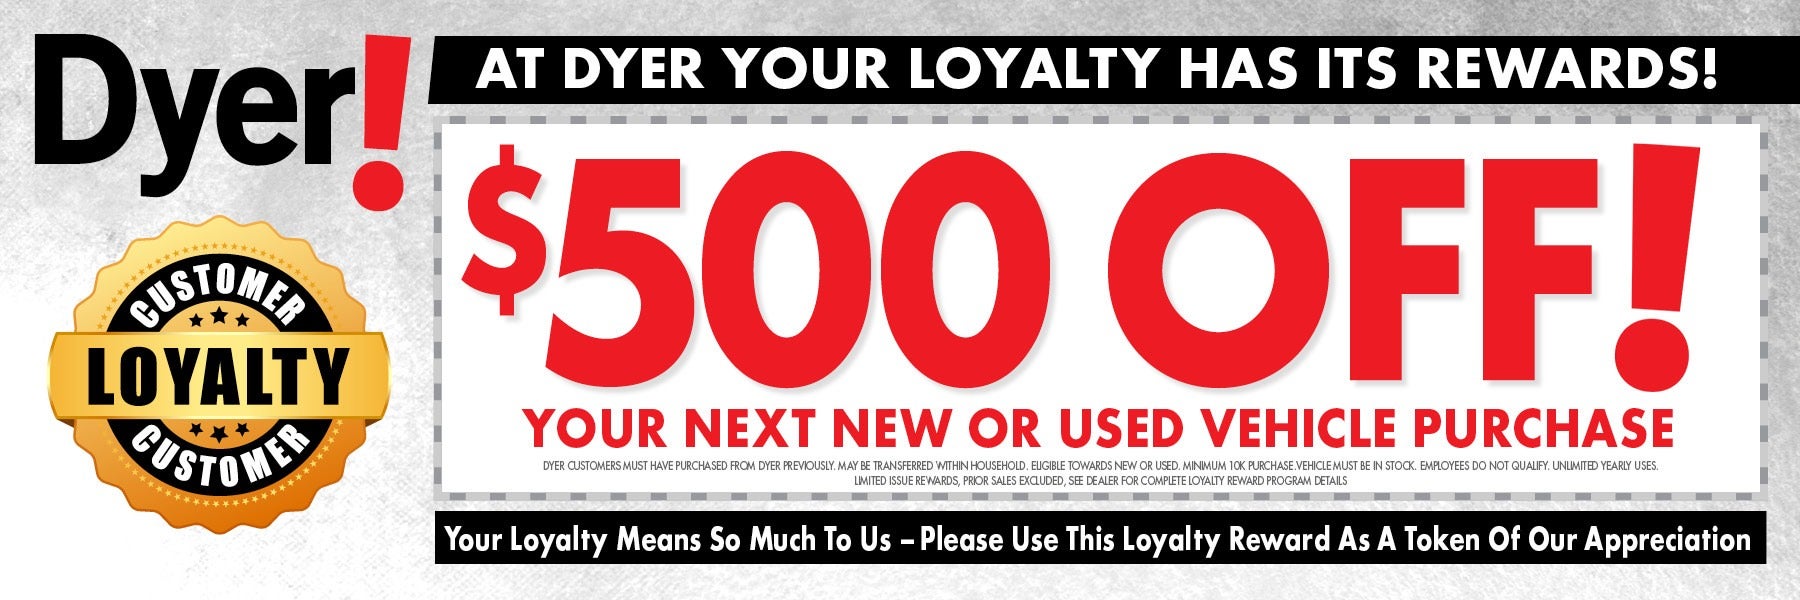 Dyer Kia Loyalty Program Coupon with $500 off and other text